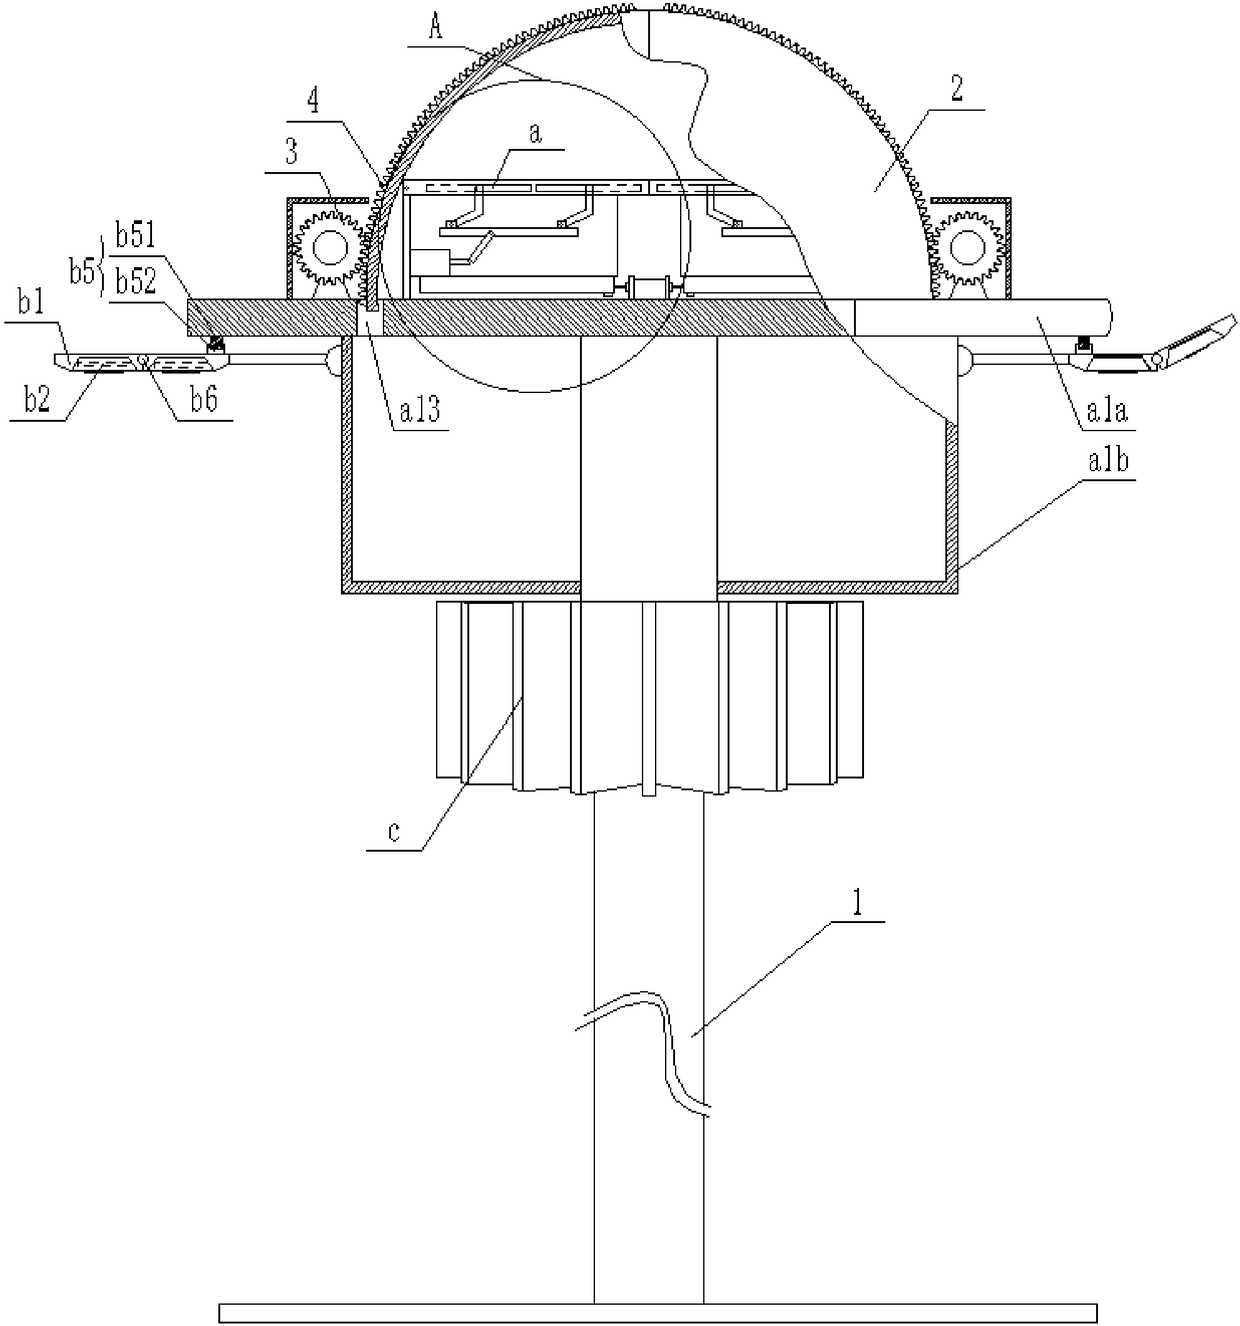 Streetlamp system achieving multi-angle solar energy collection